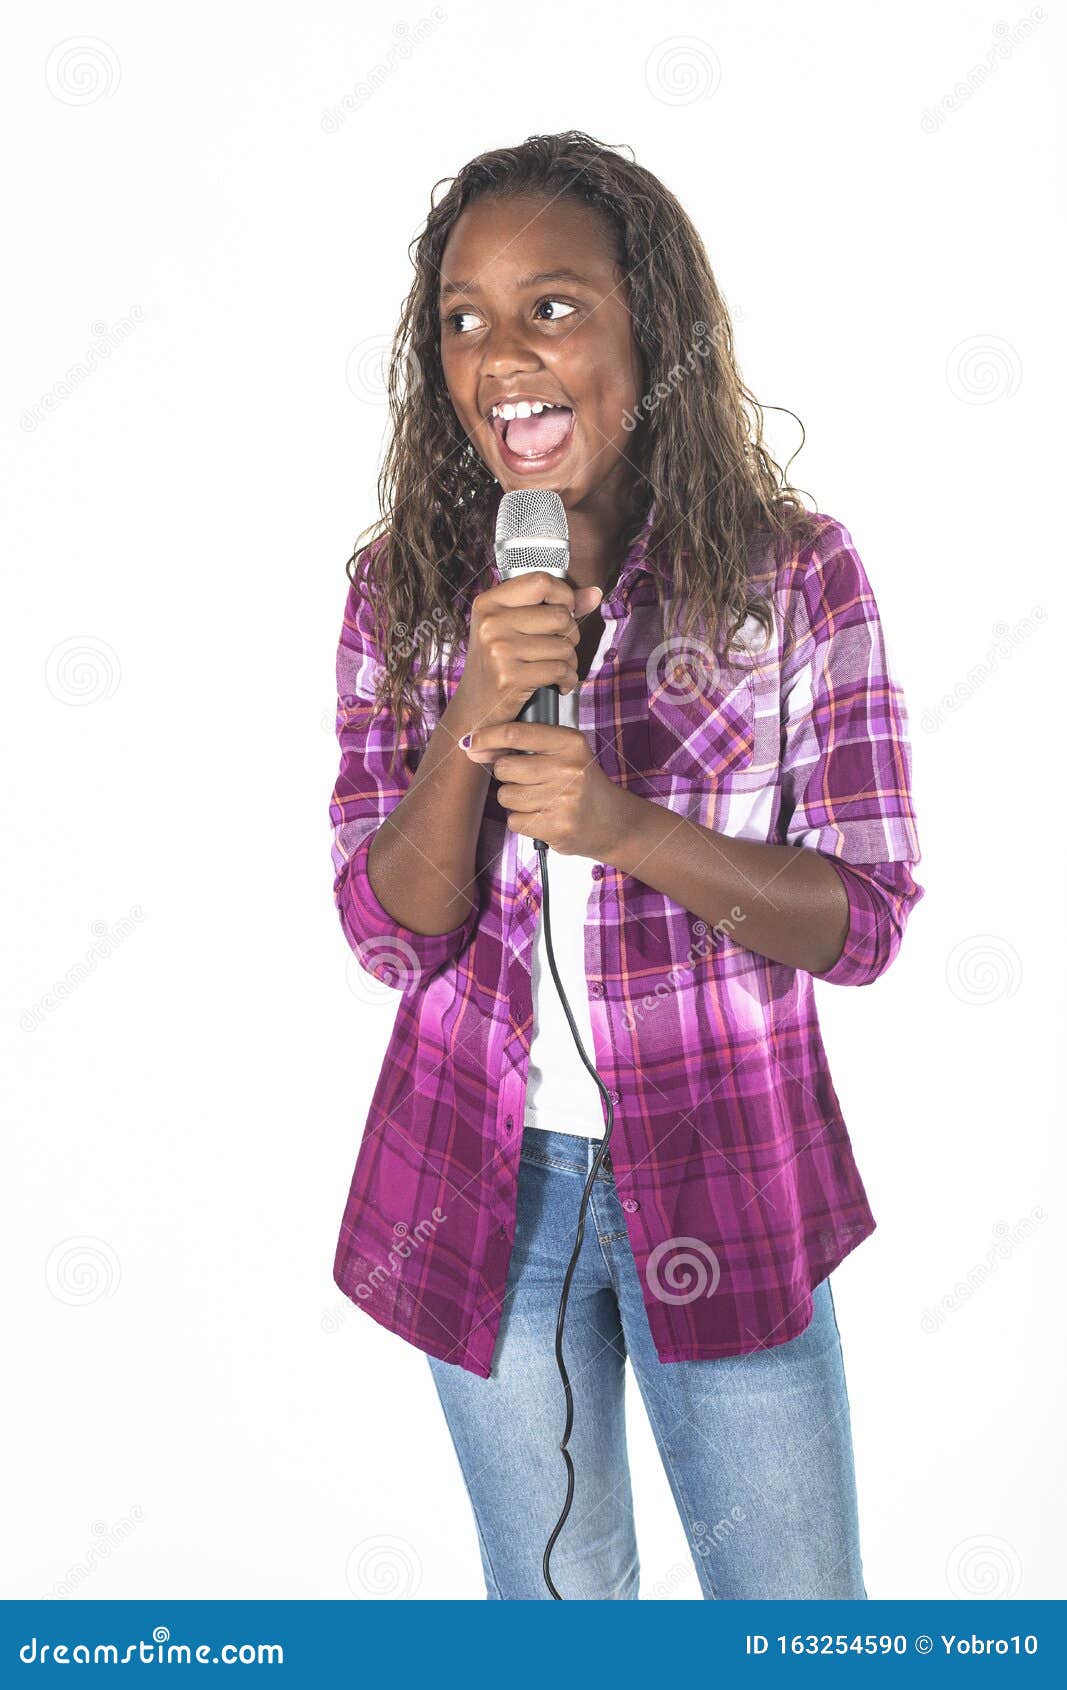 talented young diverse singer singing into a microphone